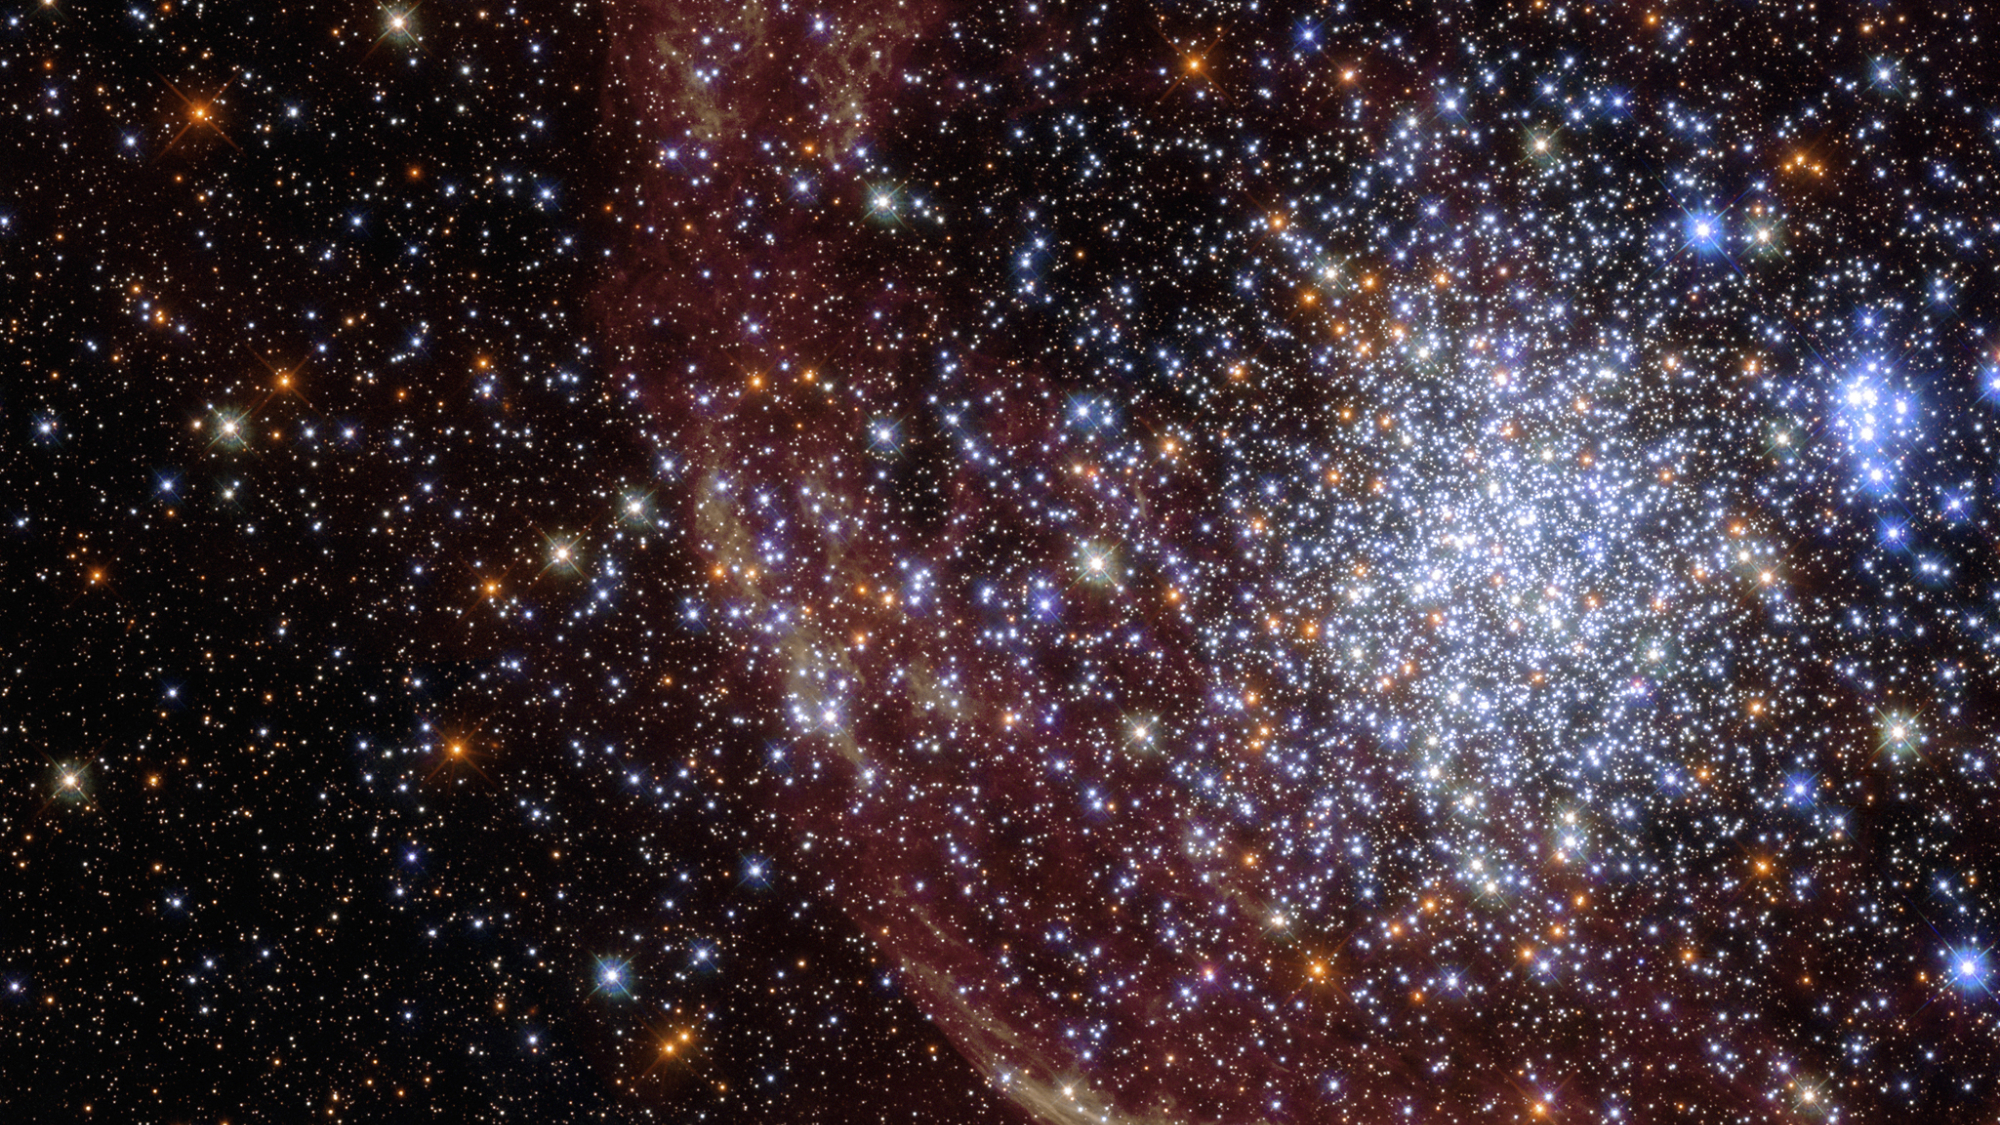 This Hubble image shows the star cluster NGC 1850, located about 160,000 light-years away.